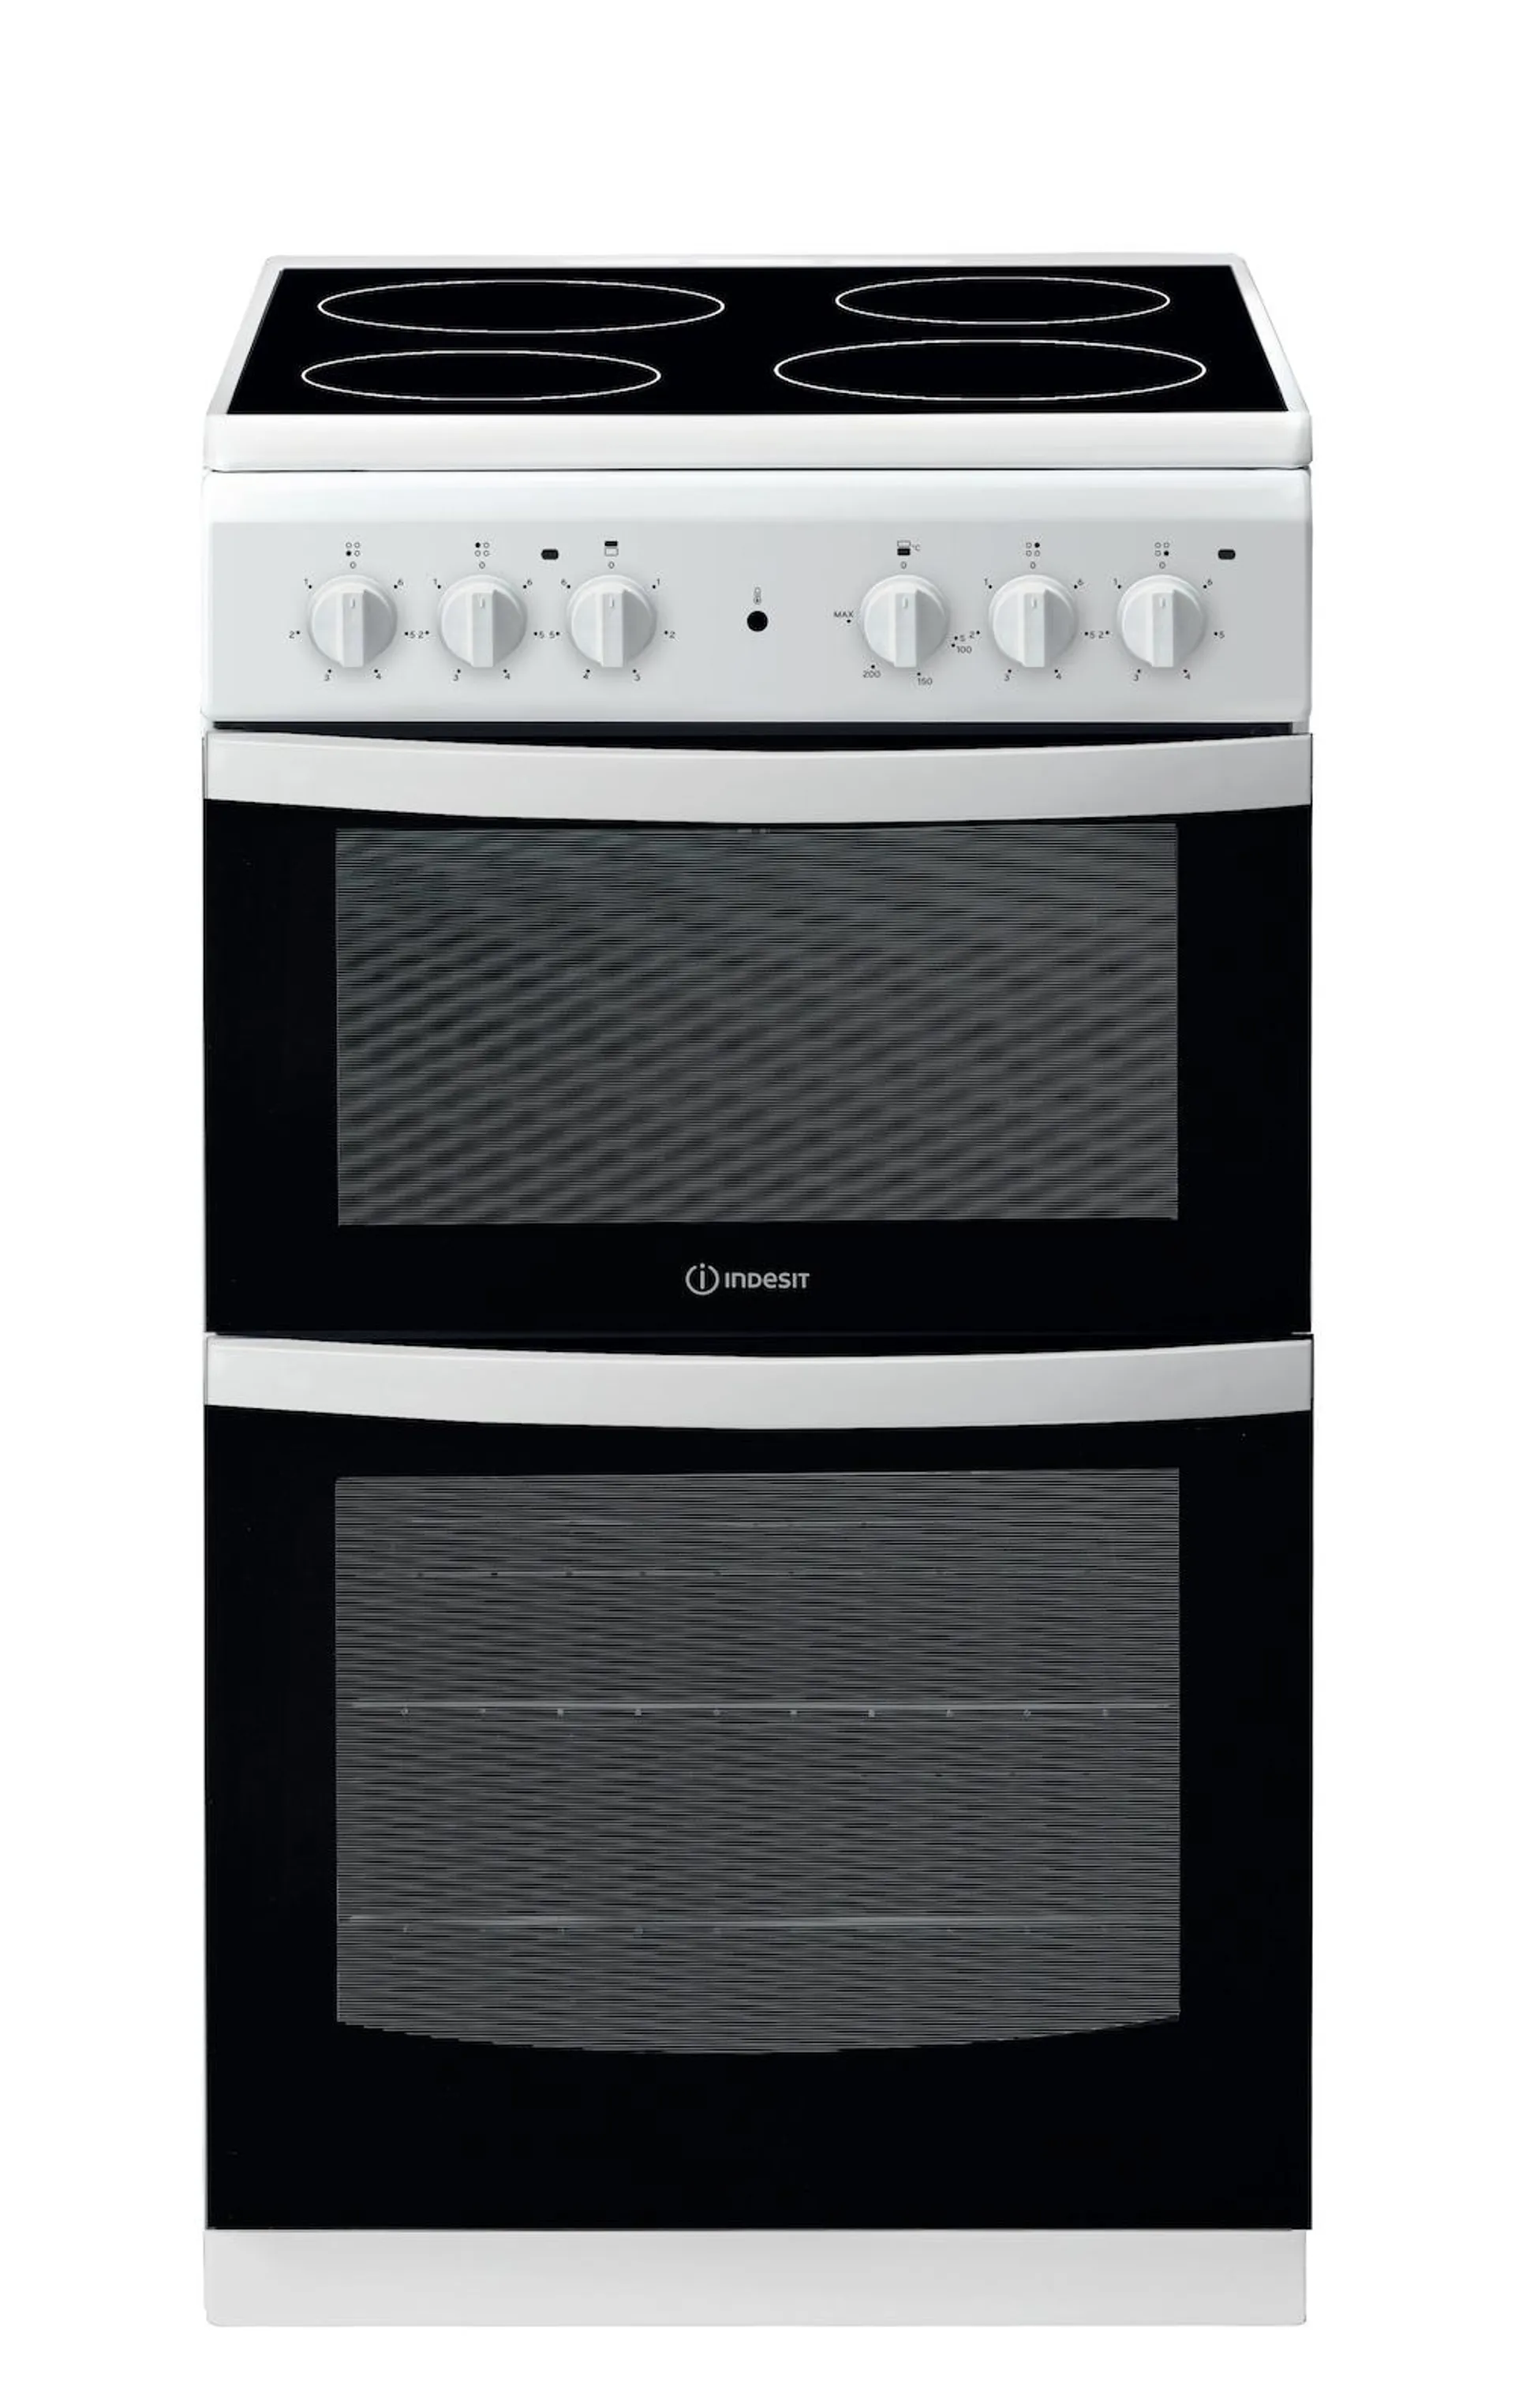 Indesit 50cm Electric Twin Cooker with Fan Oven – White